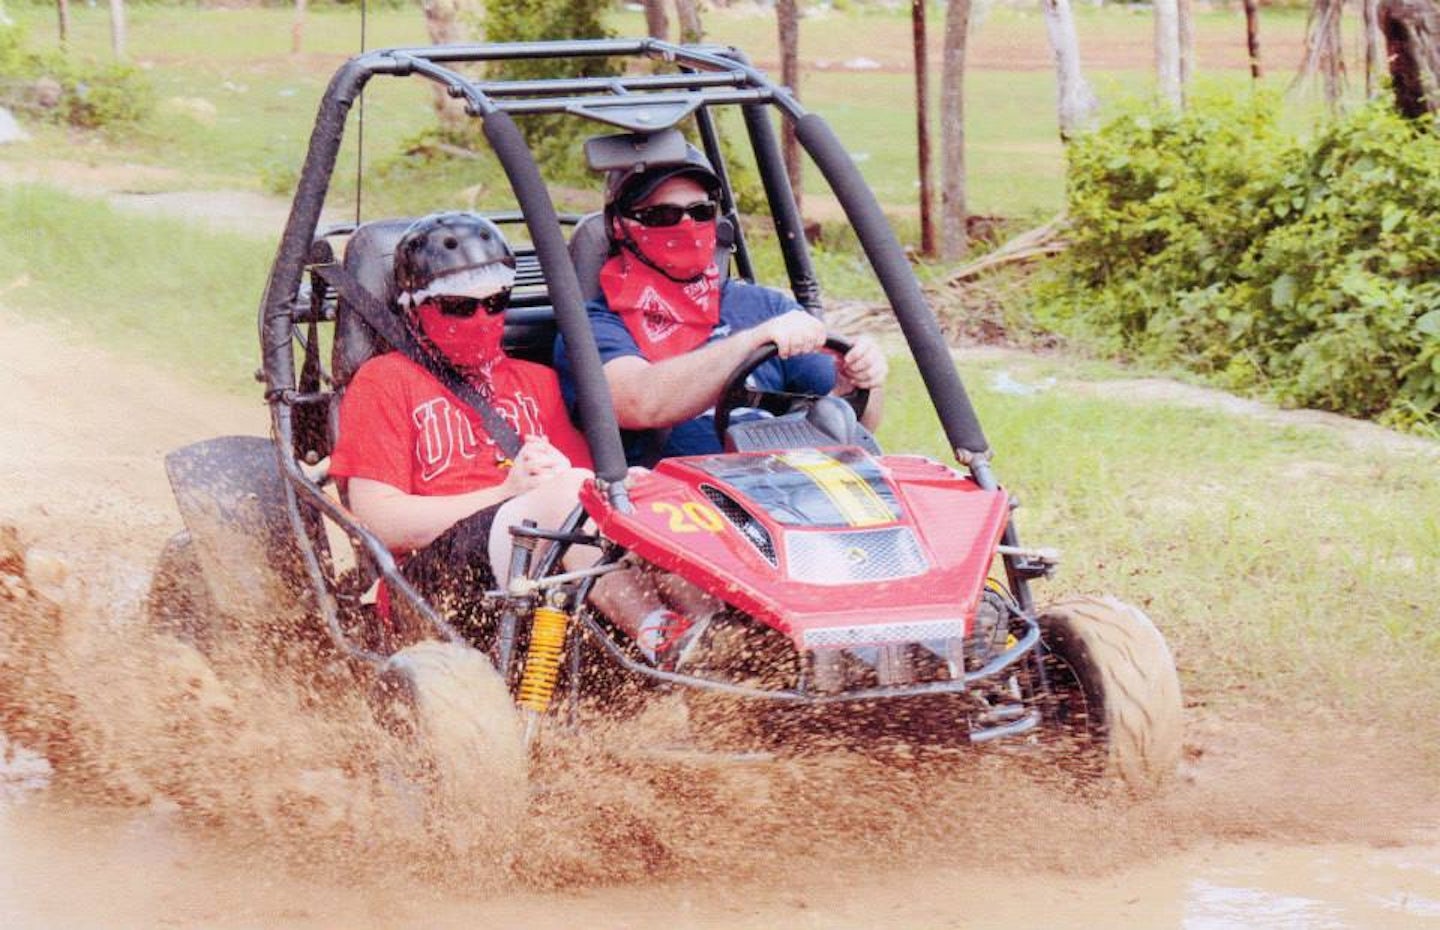 Dune Buggy Excursion in Dominican Republic